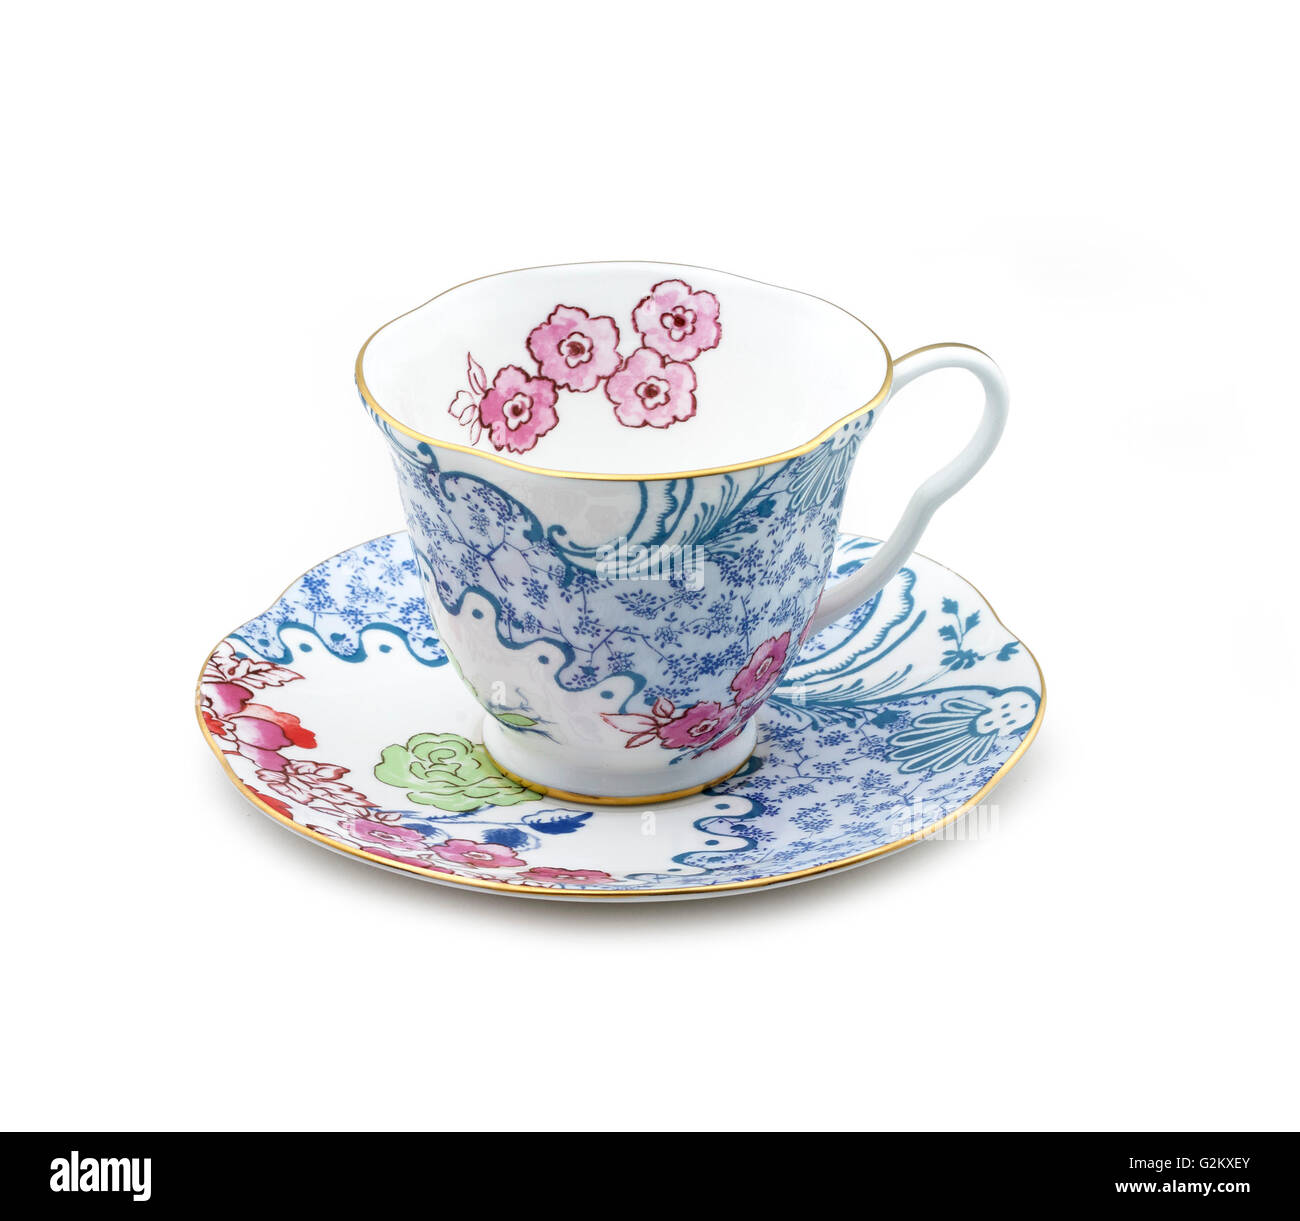 Patterned china teacup saucer white background Stock Photo